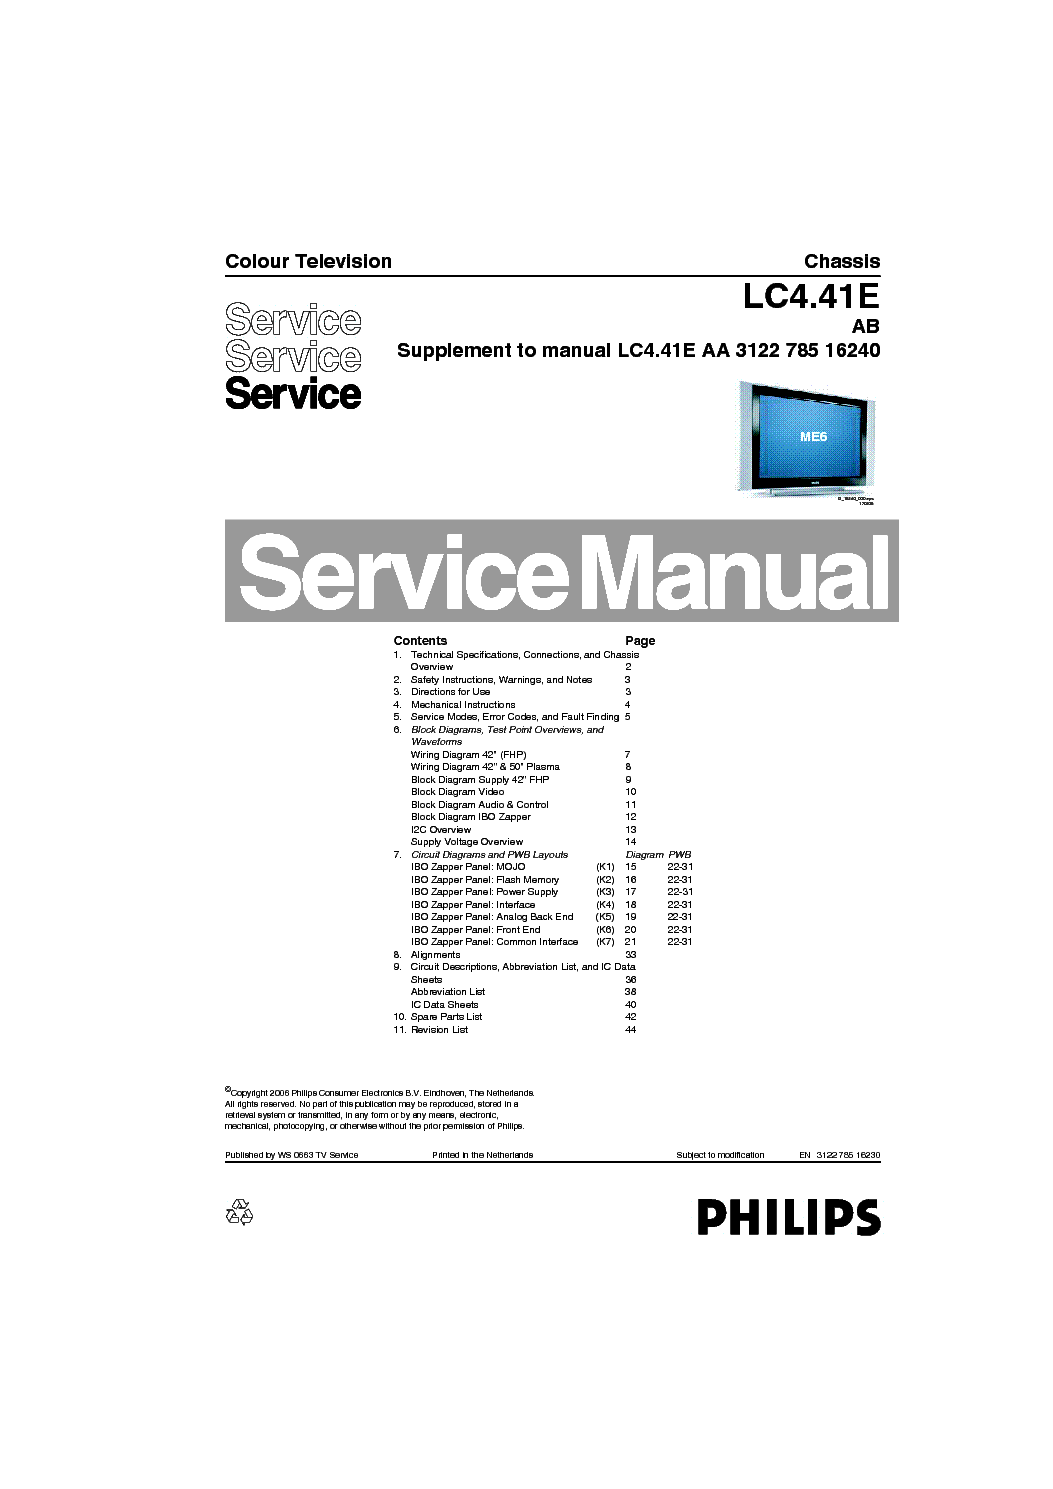 PHILIPS 42PF5331 CHASSIS LC4.41E-AB SM service manual (1st page)